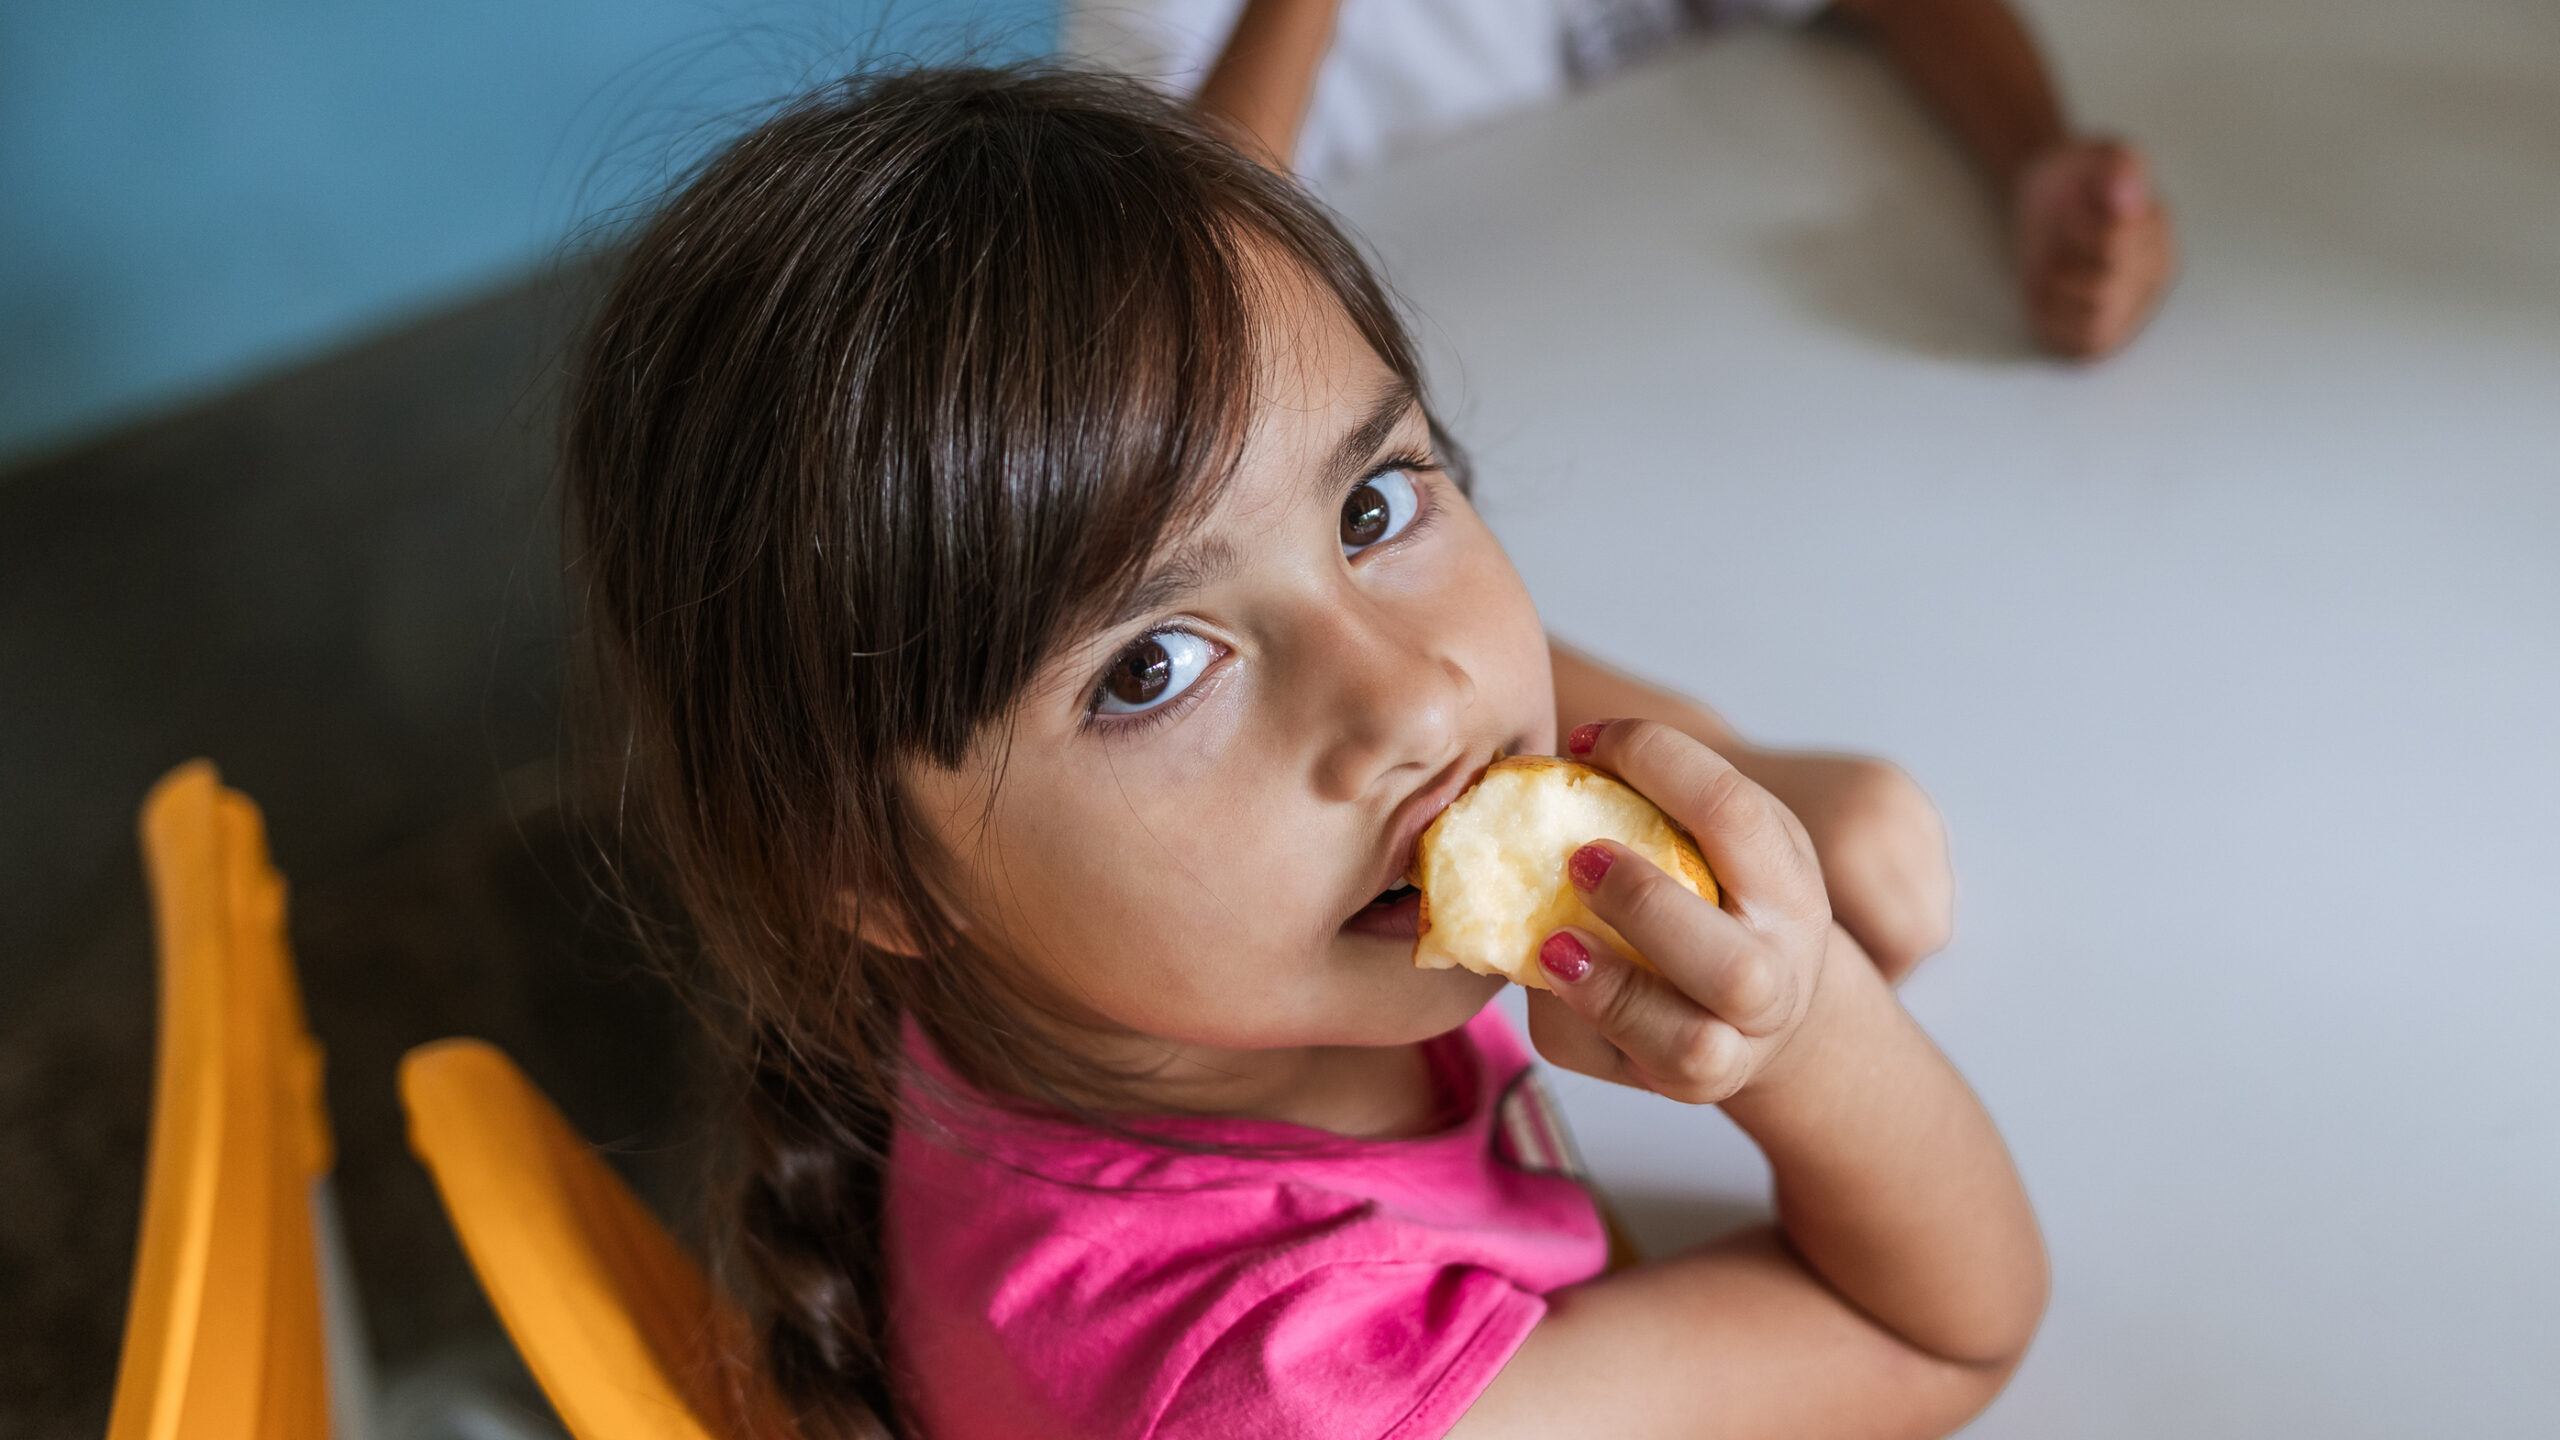 The pandemic sent hunger soaring in Brazil. They’re fighting back with school lunches